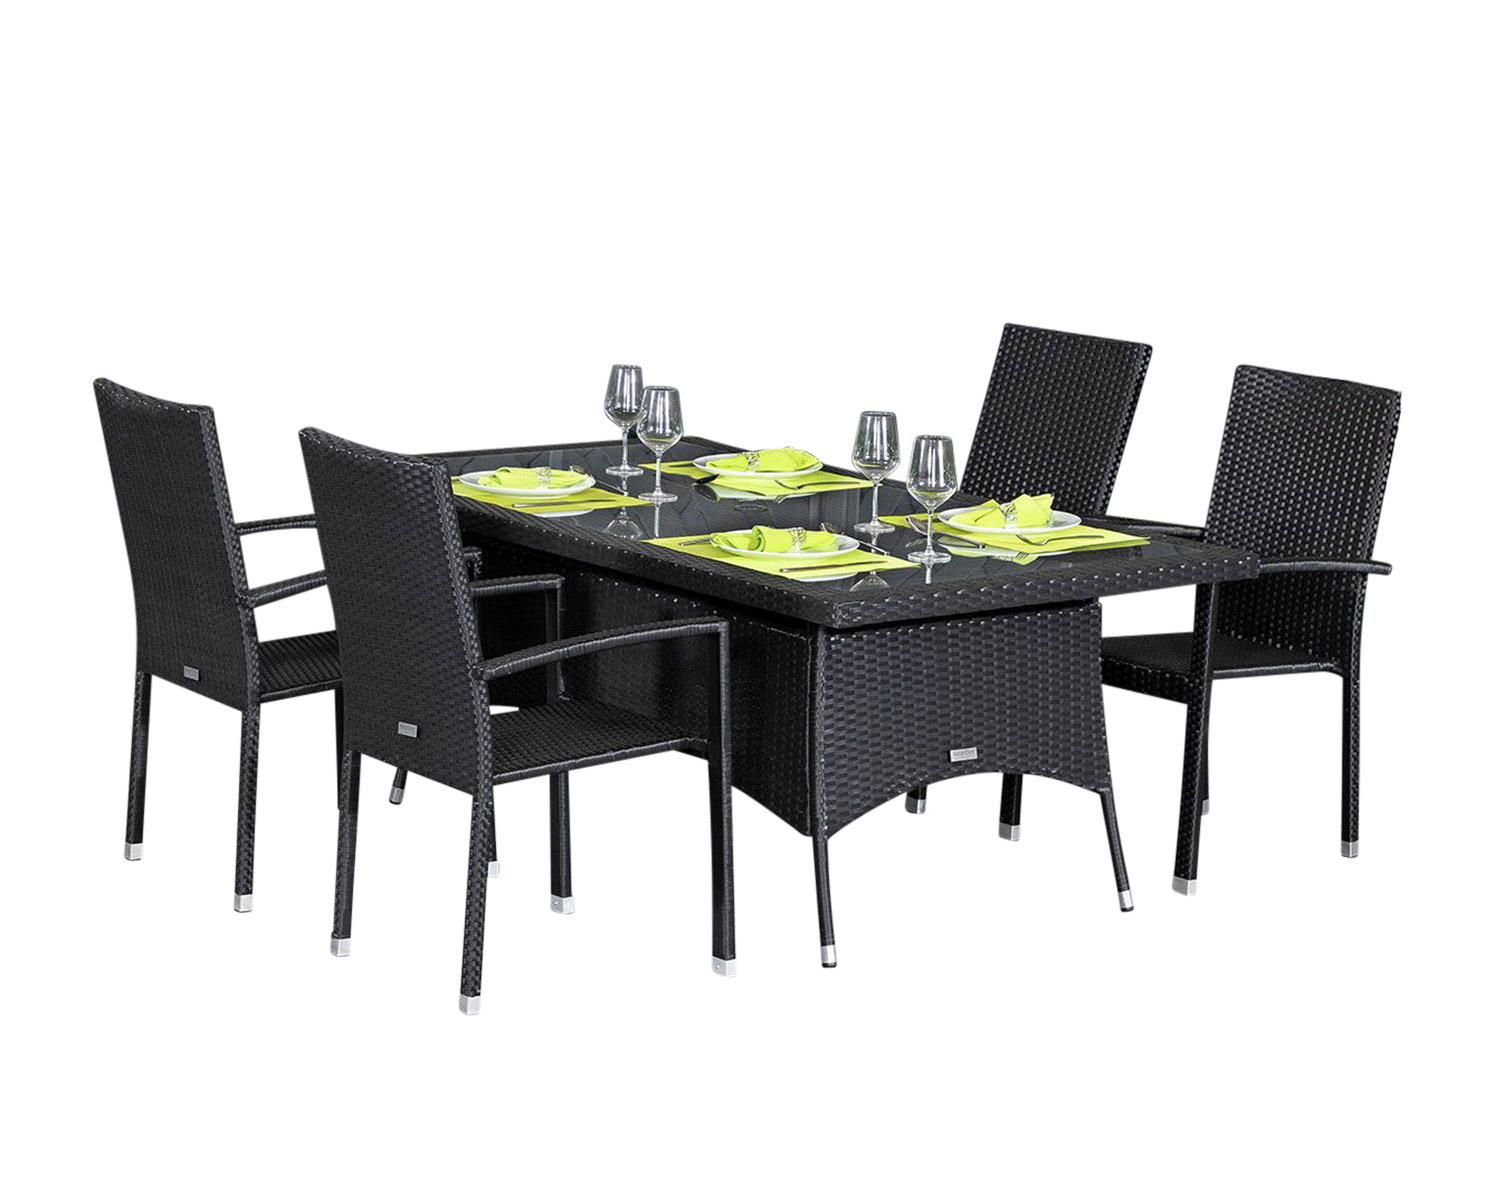 4 Seat Rattan Garden Dining Set With Large Rectangular Dining Table In Black Rio Rattan Direct